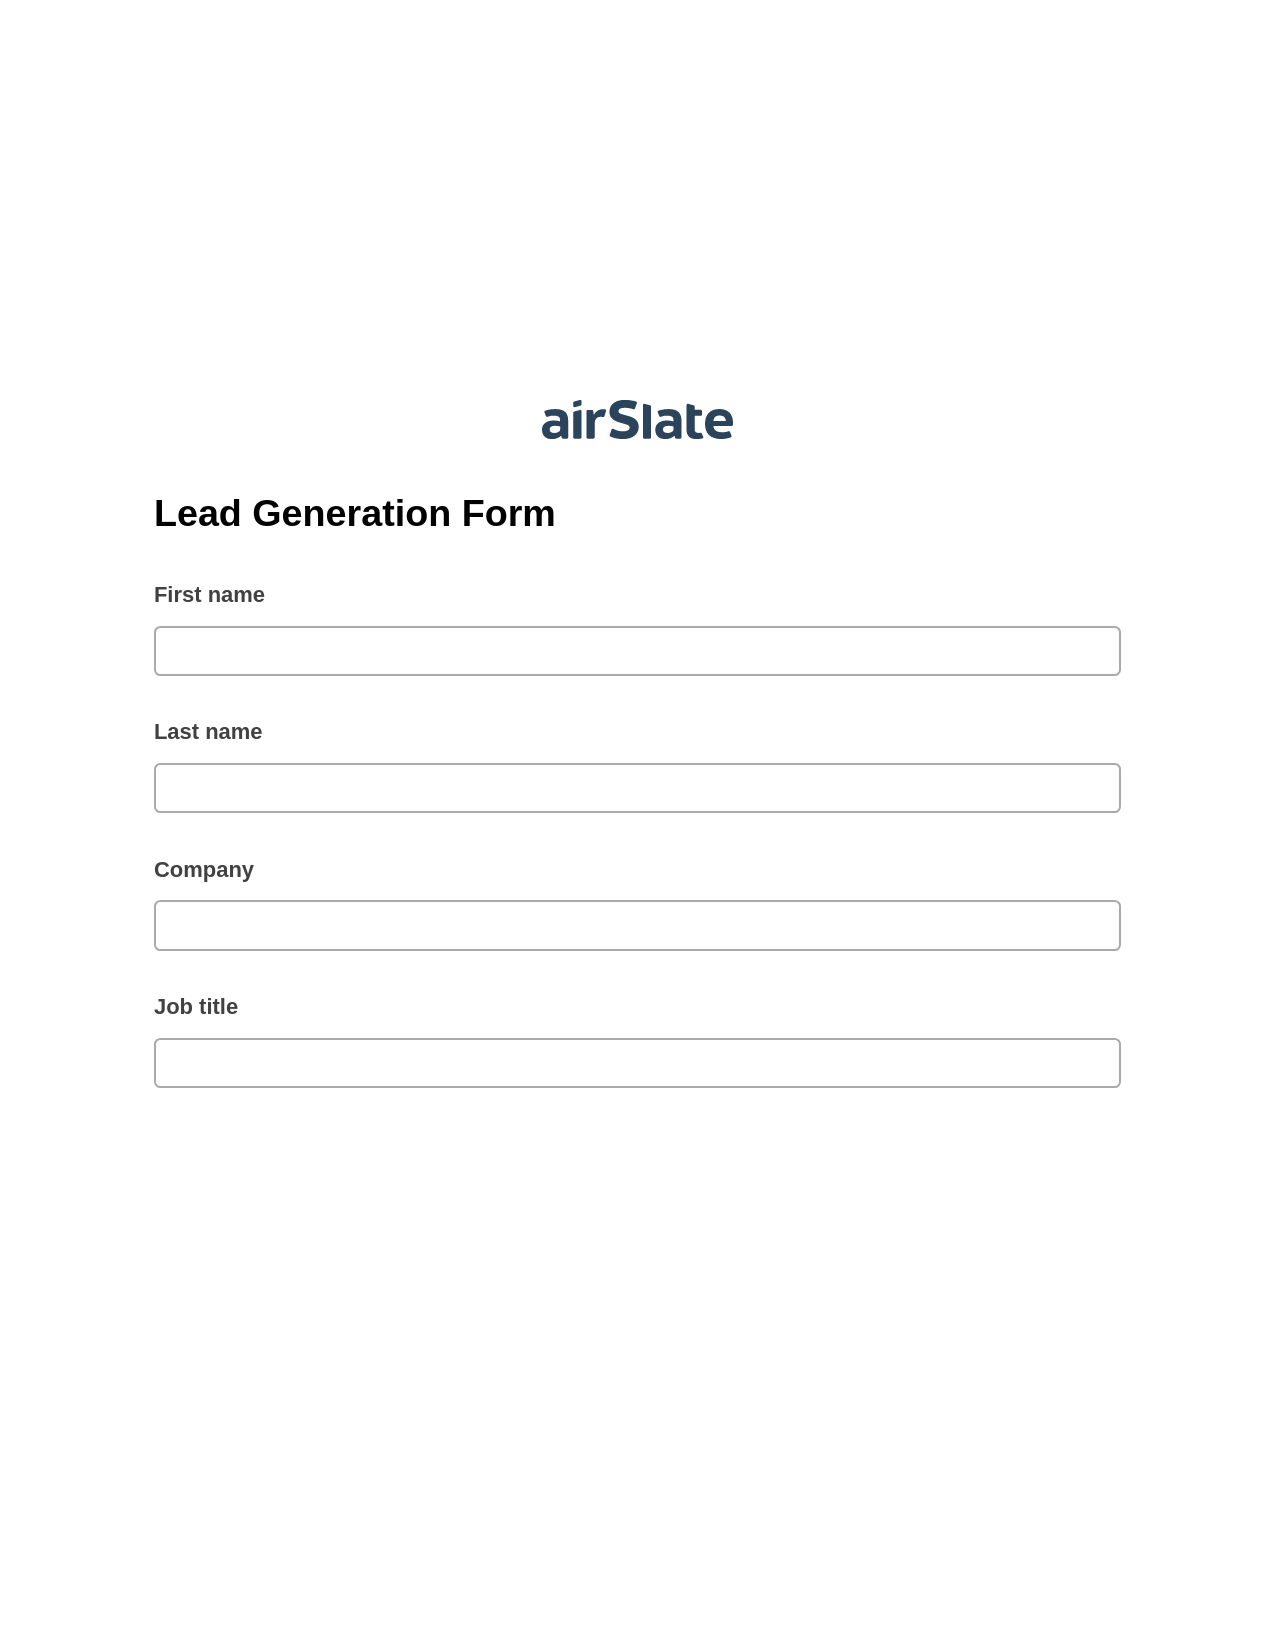 Lead Generation Form Pre-fill Document Bot, Slack Notification Bot, Export to Excel 365 Bot